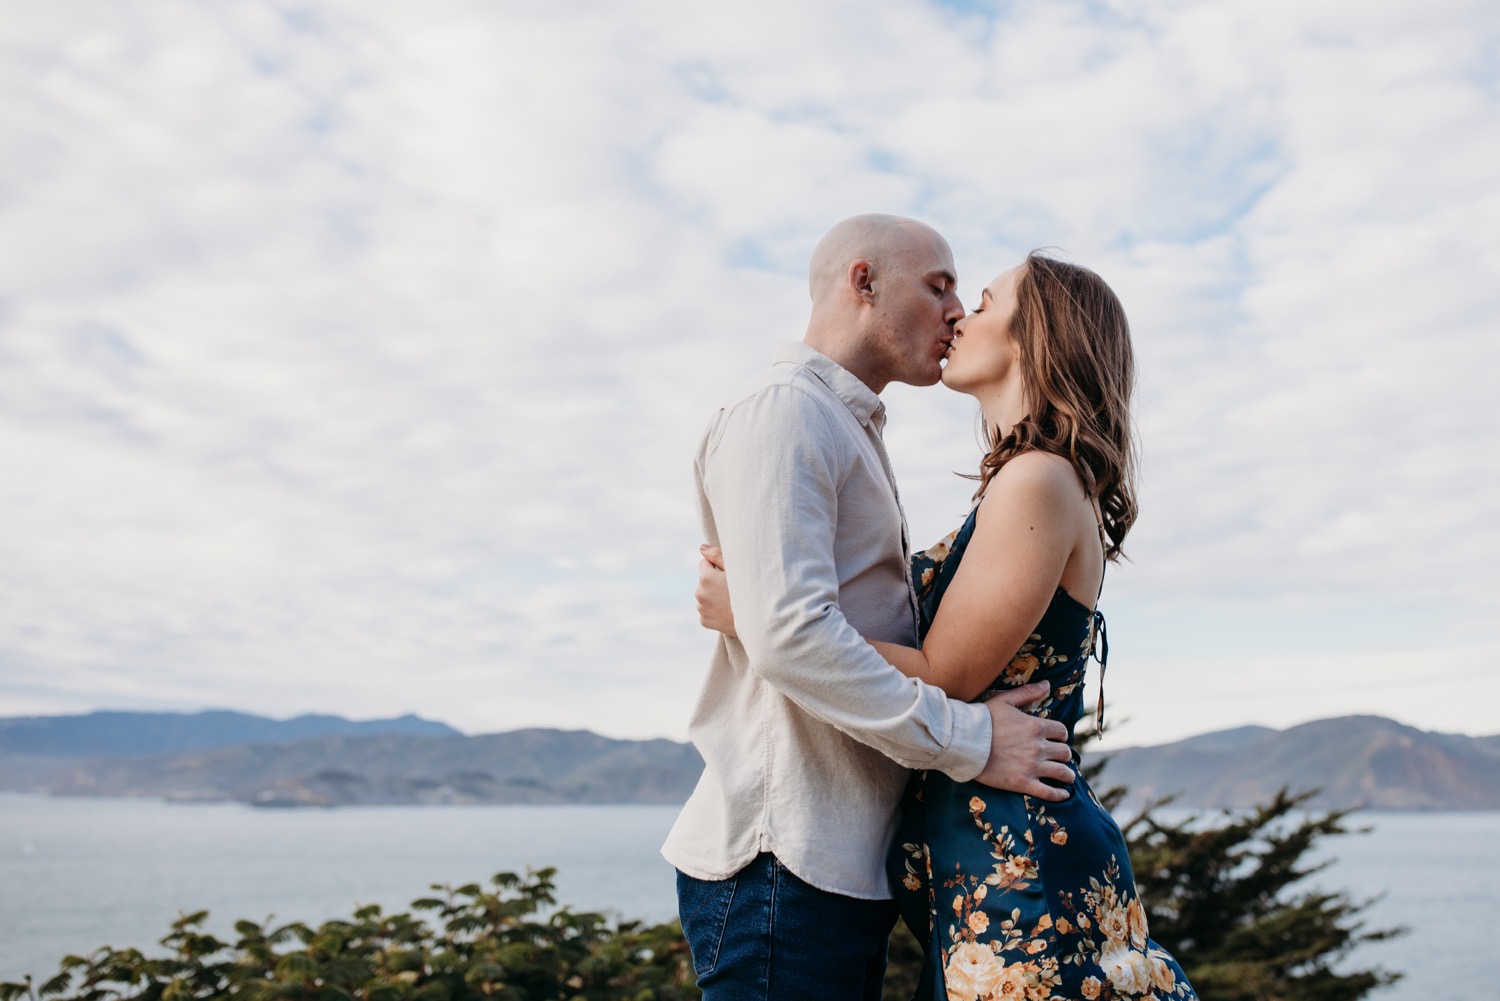 Couple kisses with a view of the San Francisco Bay in the background on their San Francisco engagement photoshoot.